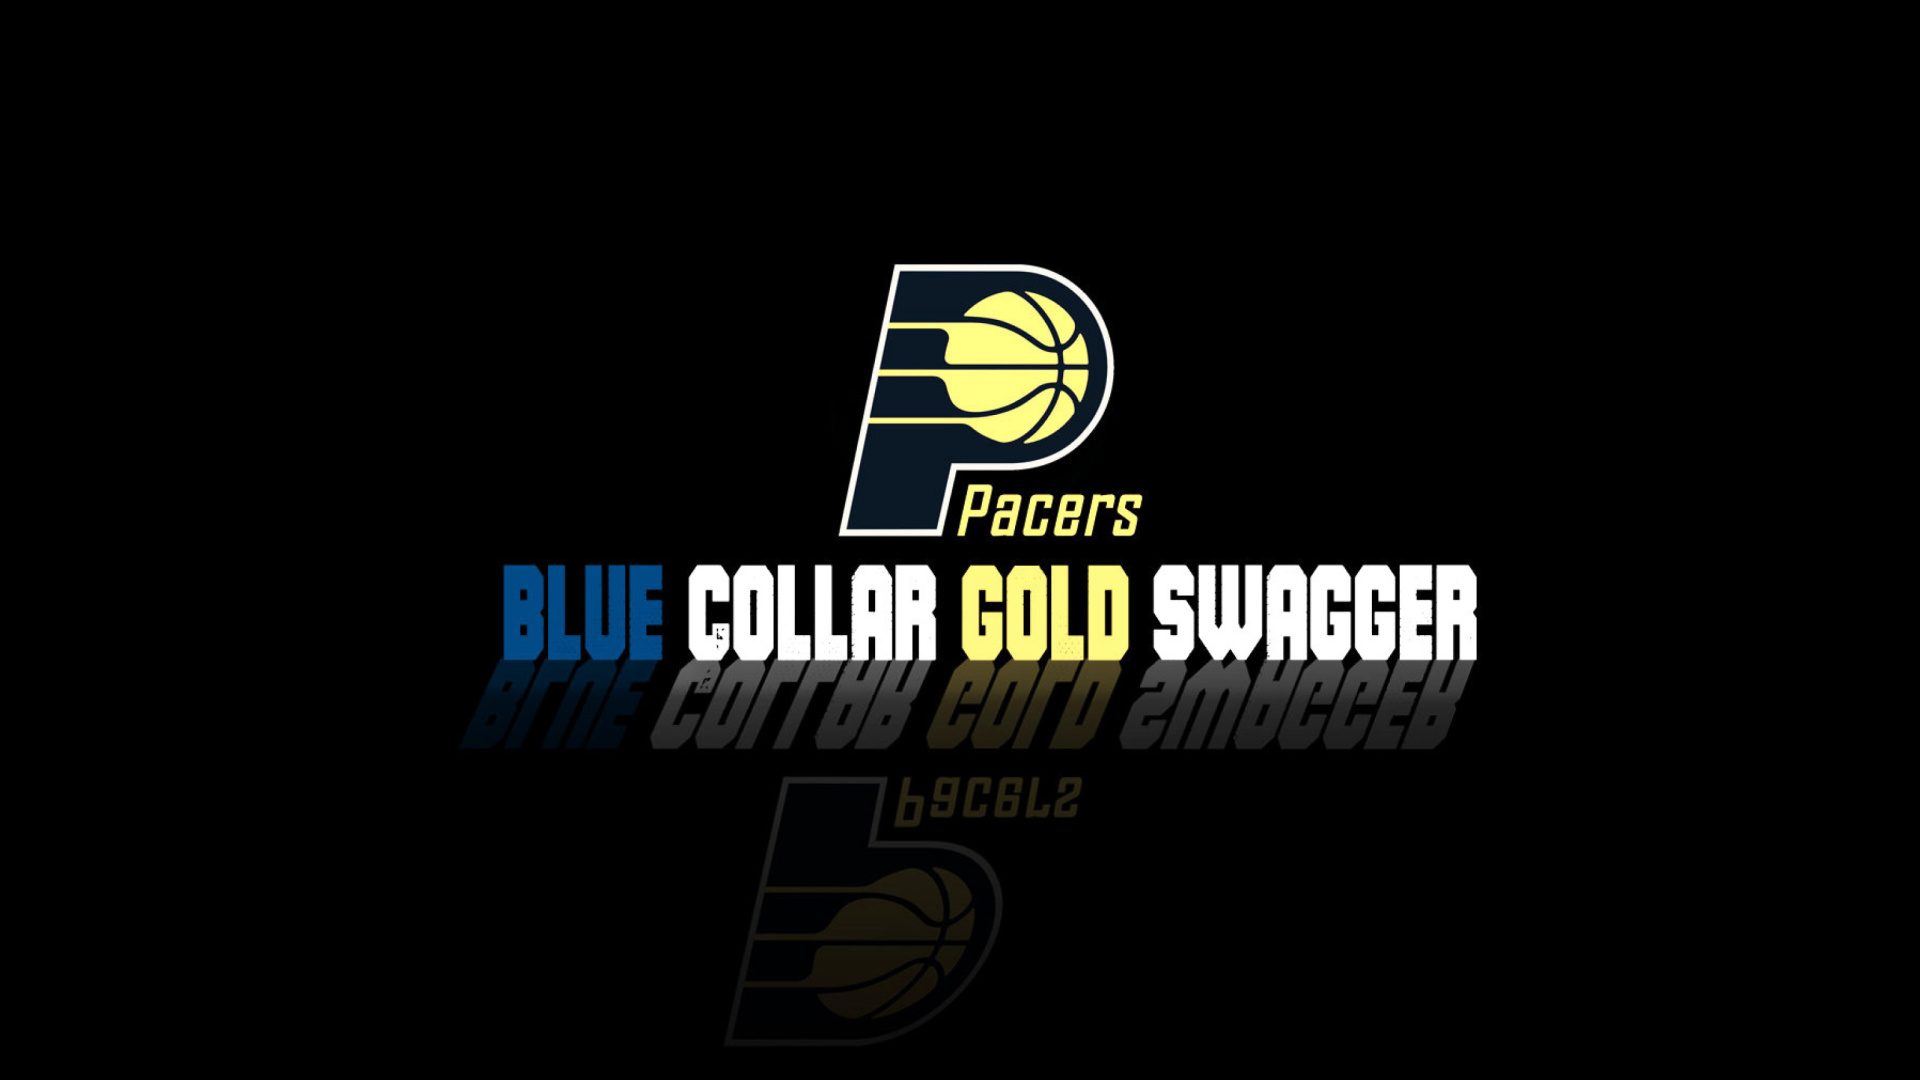 Indiana Pacers Team wallpaper 1920x1080